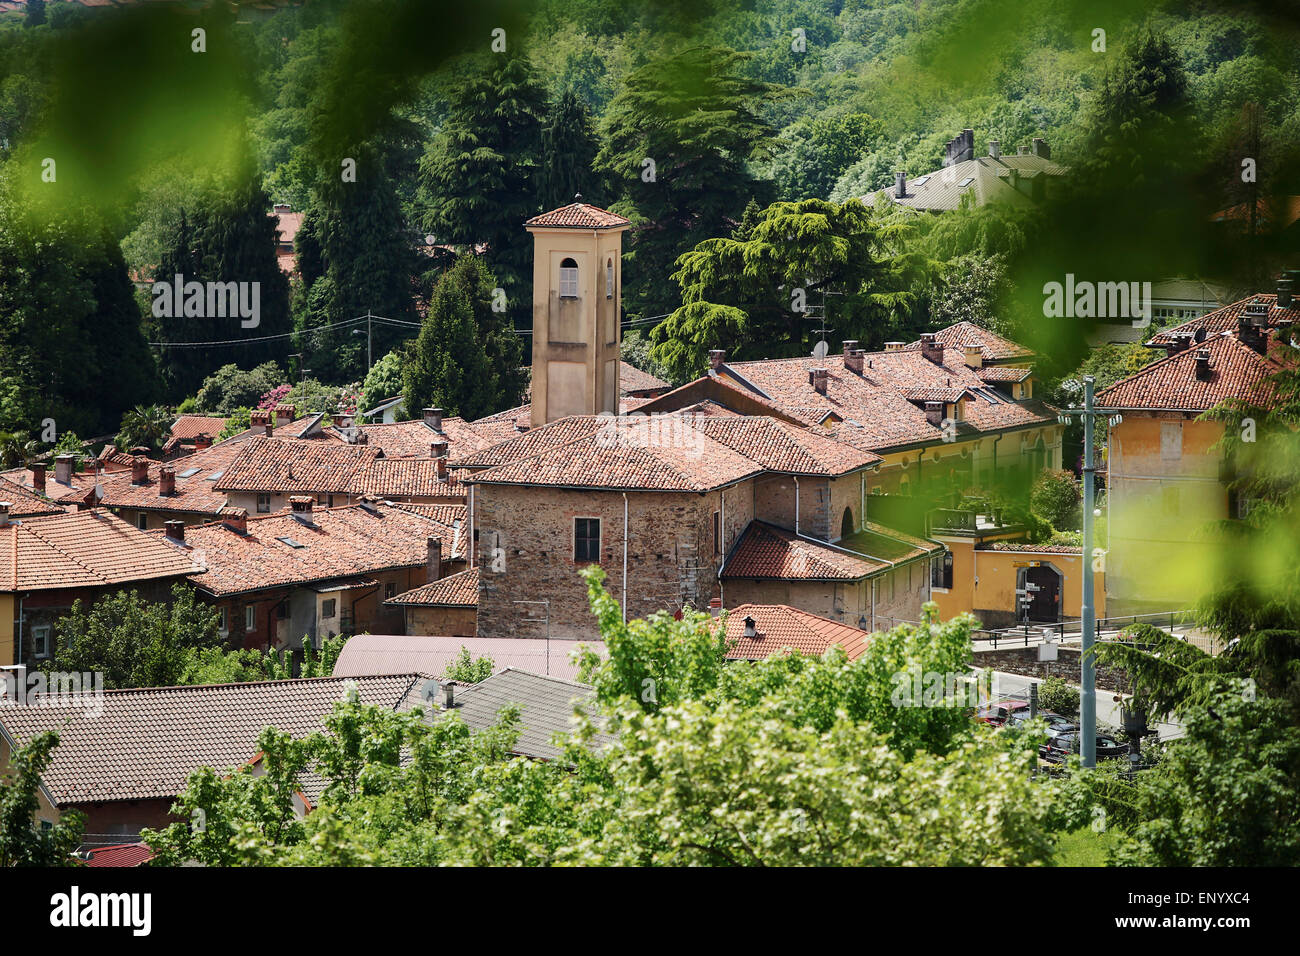 A small town viewed from the hillside near Biella, Italy Stock Photo